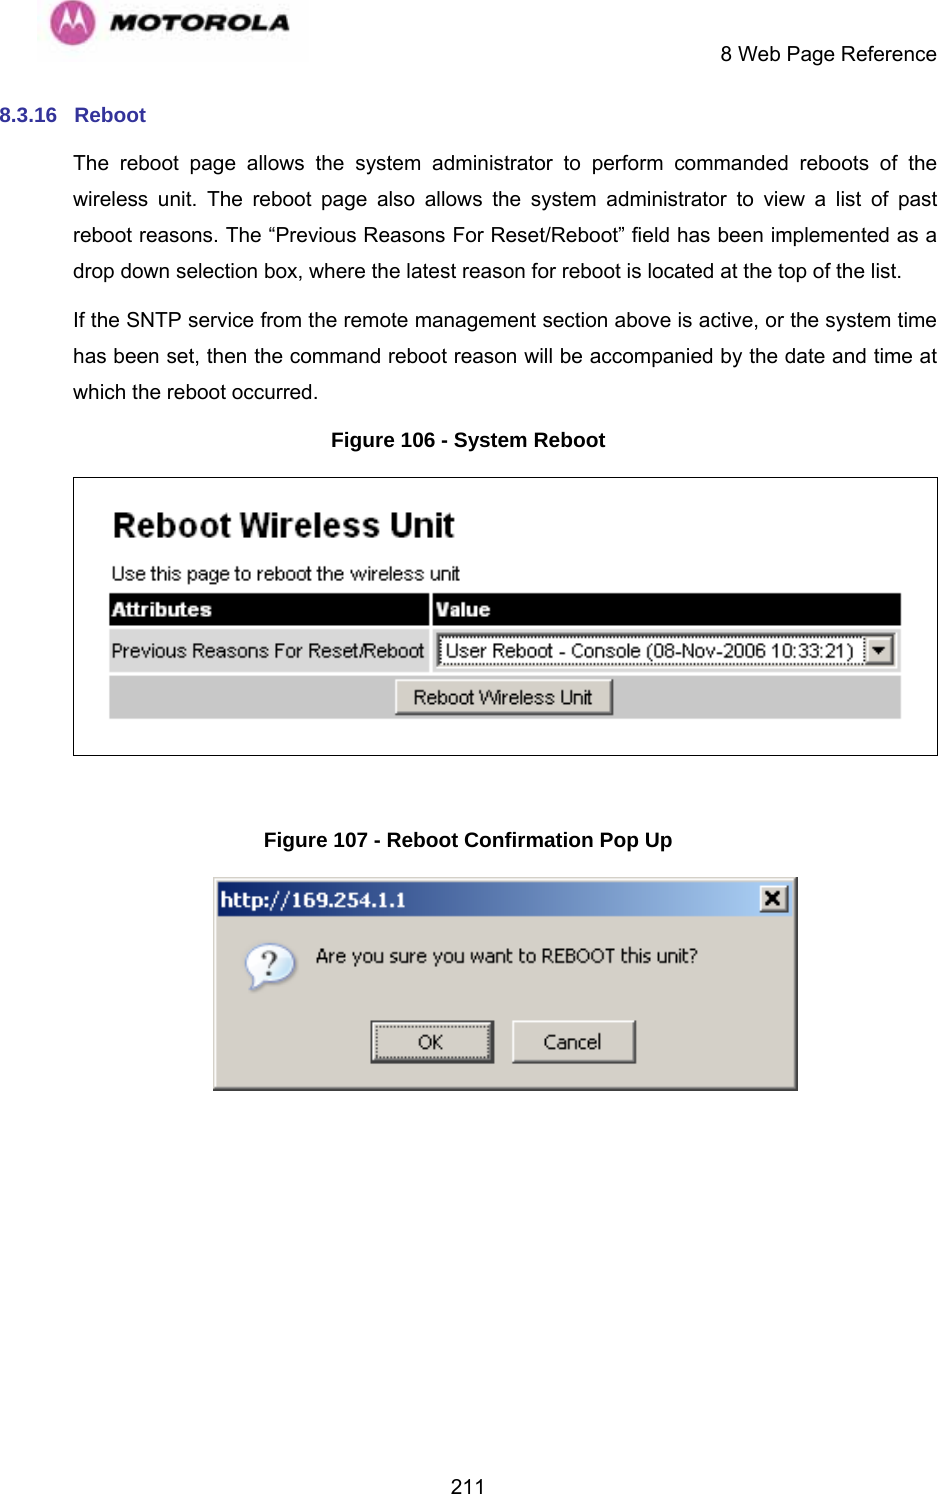     8 Web Page Reference  2118.3.16  Reboot  The reboot page allows the system administrator to perform commanded reboots of the wireless unit. The reboot page also allows the system administrator to view a list of past reboot reasons. The “Previous Reasons For Reset/Reboot” field has been implemented as a drop down selection box, where the latest reason for reboot is located at the top of the list. If the SNTP service from the remote management section above is active, or the system time has been set, then the command reboot reason will be accompanied by the date and time at which the reboot occurred. Figure 106 - System Reboot   Figure 107 - Reboot Confirmation Pop Up   